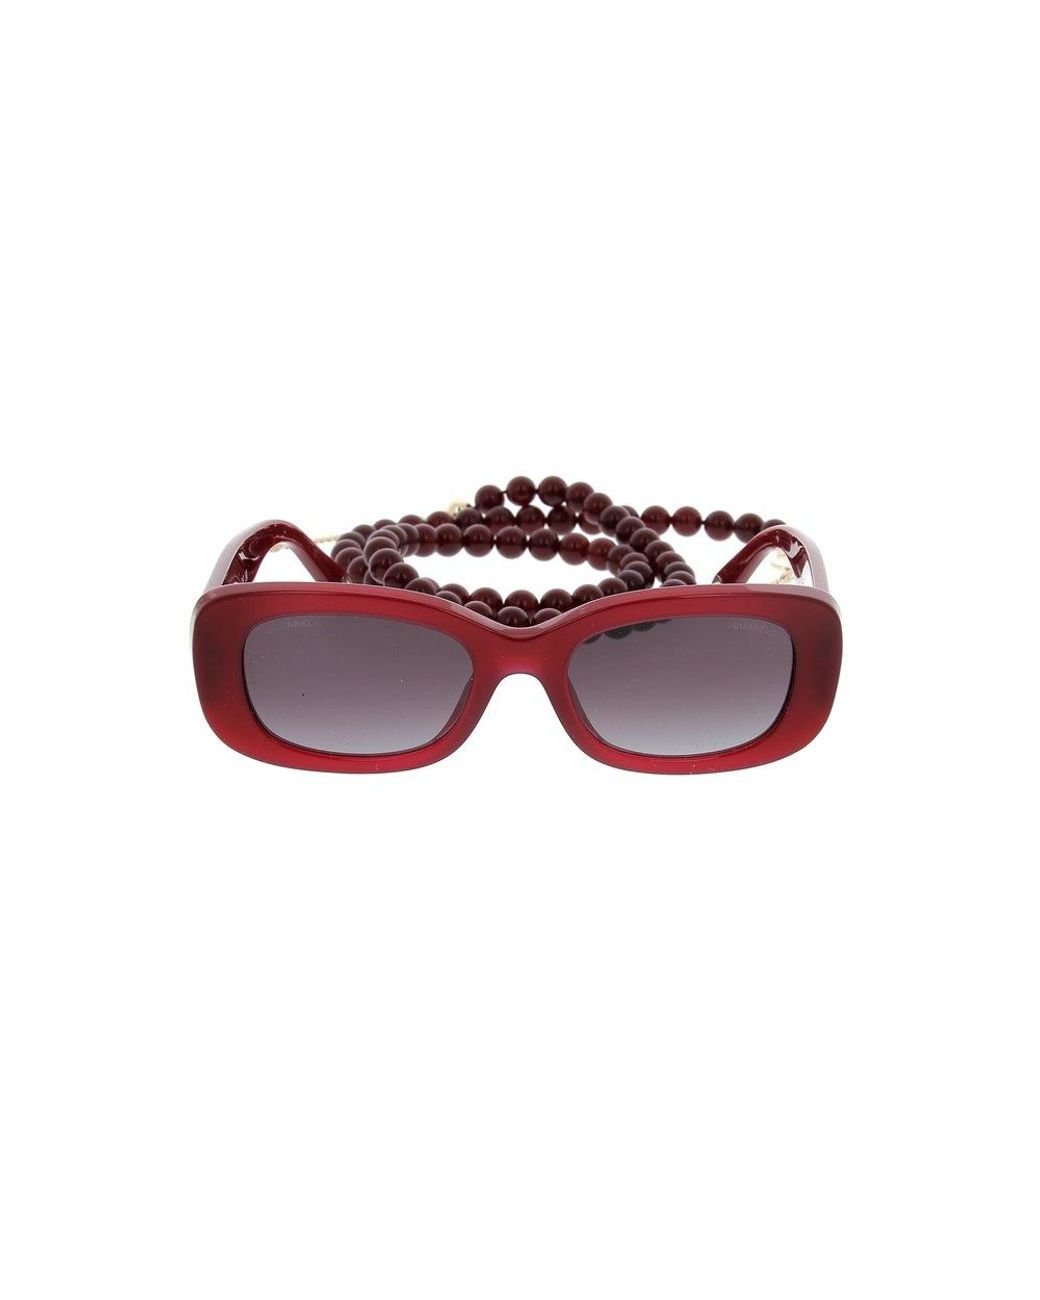 Chanel Square Frame Beaded Sunglasses in Red